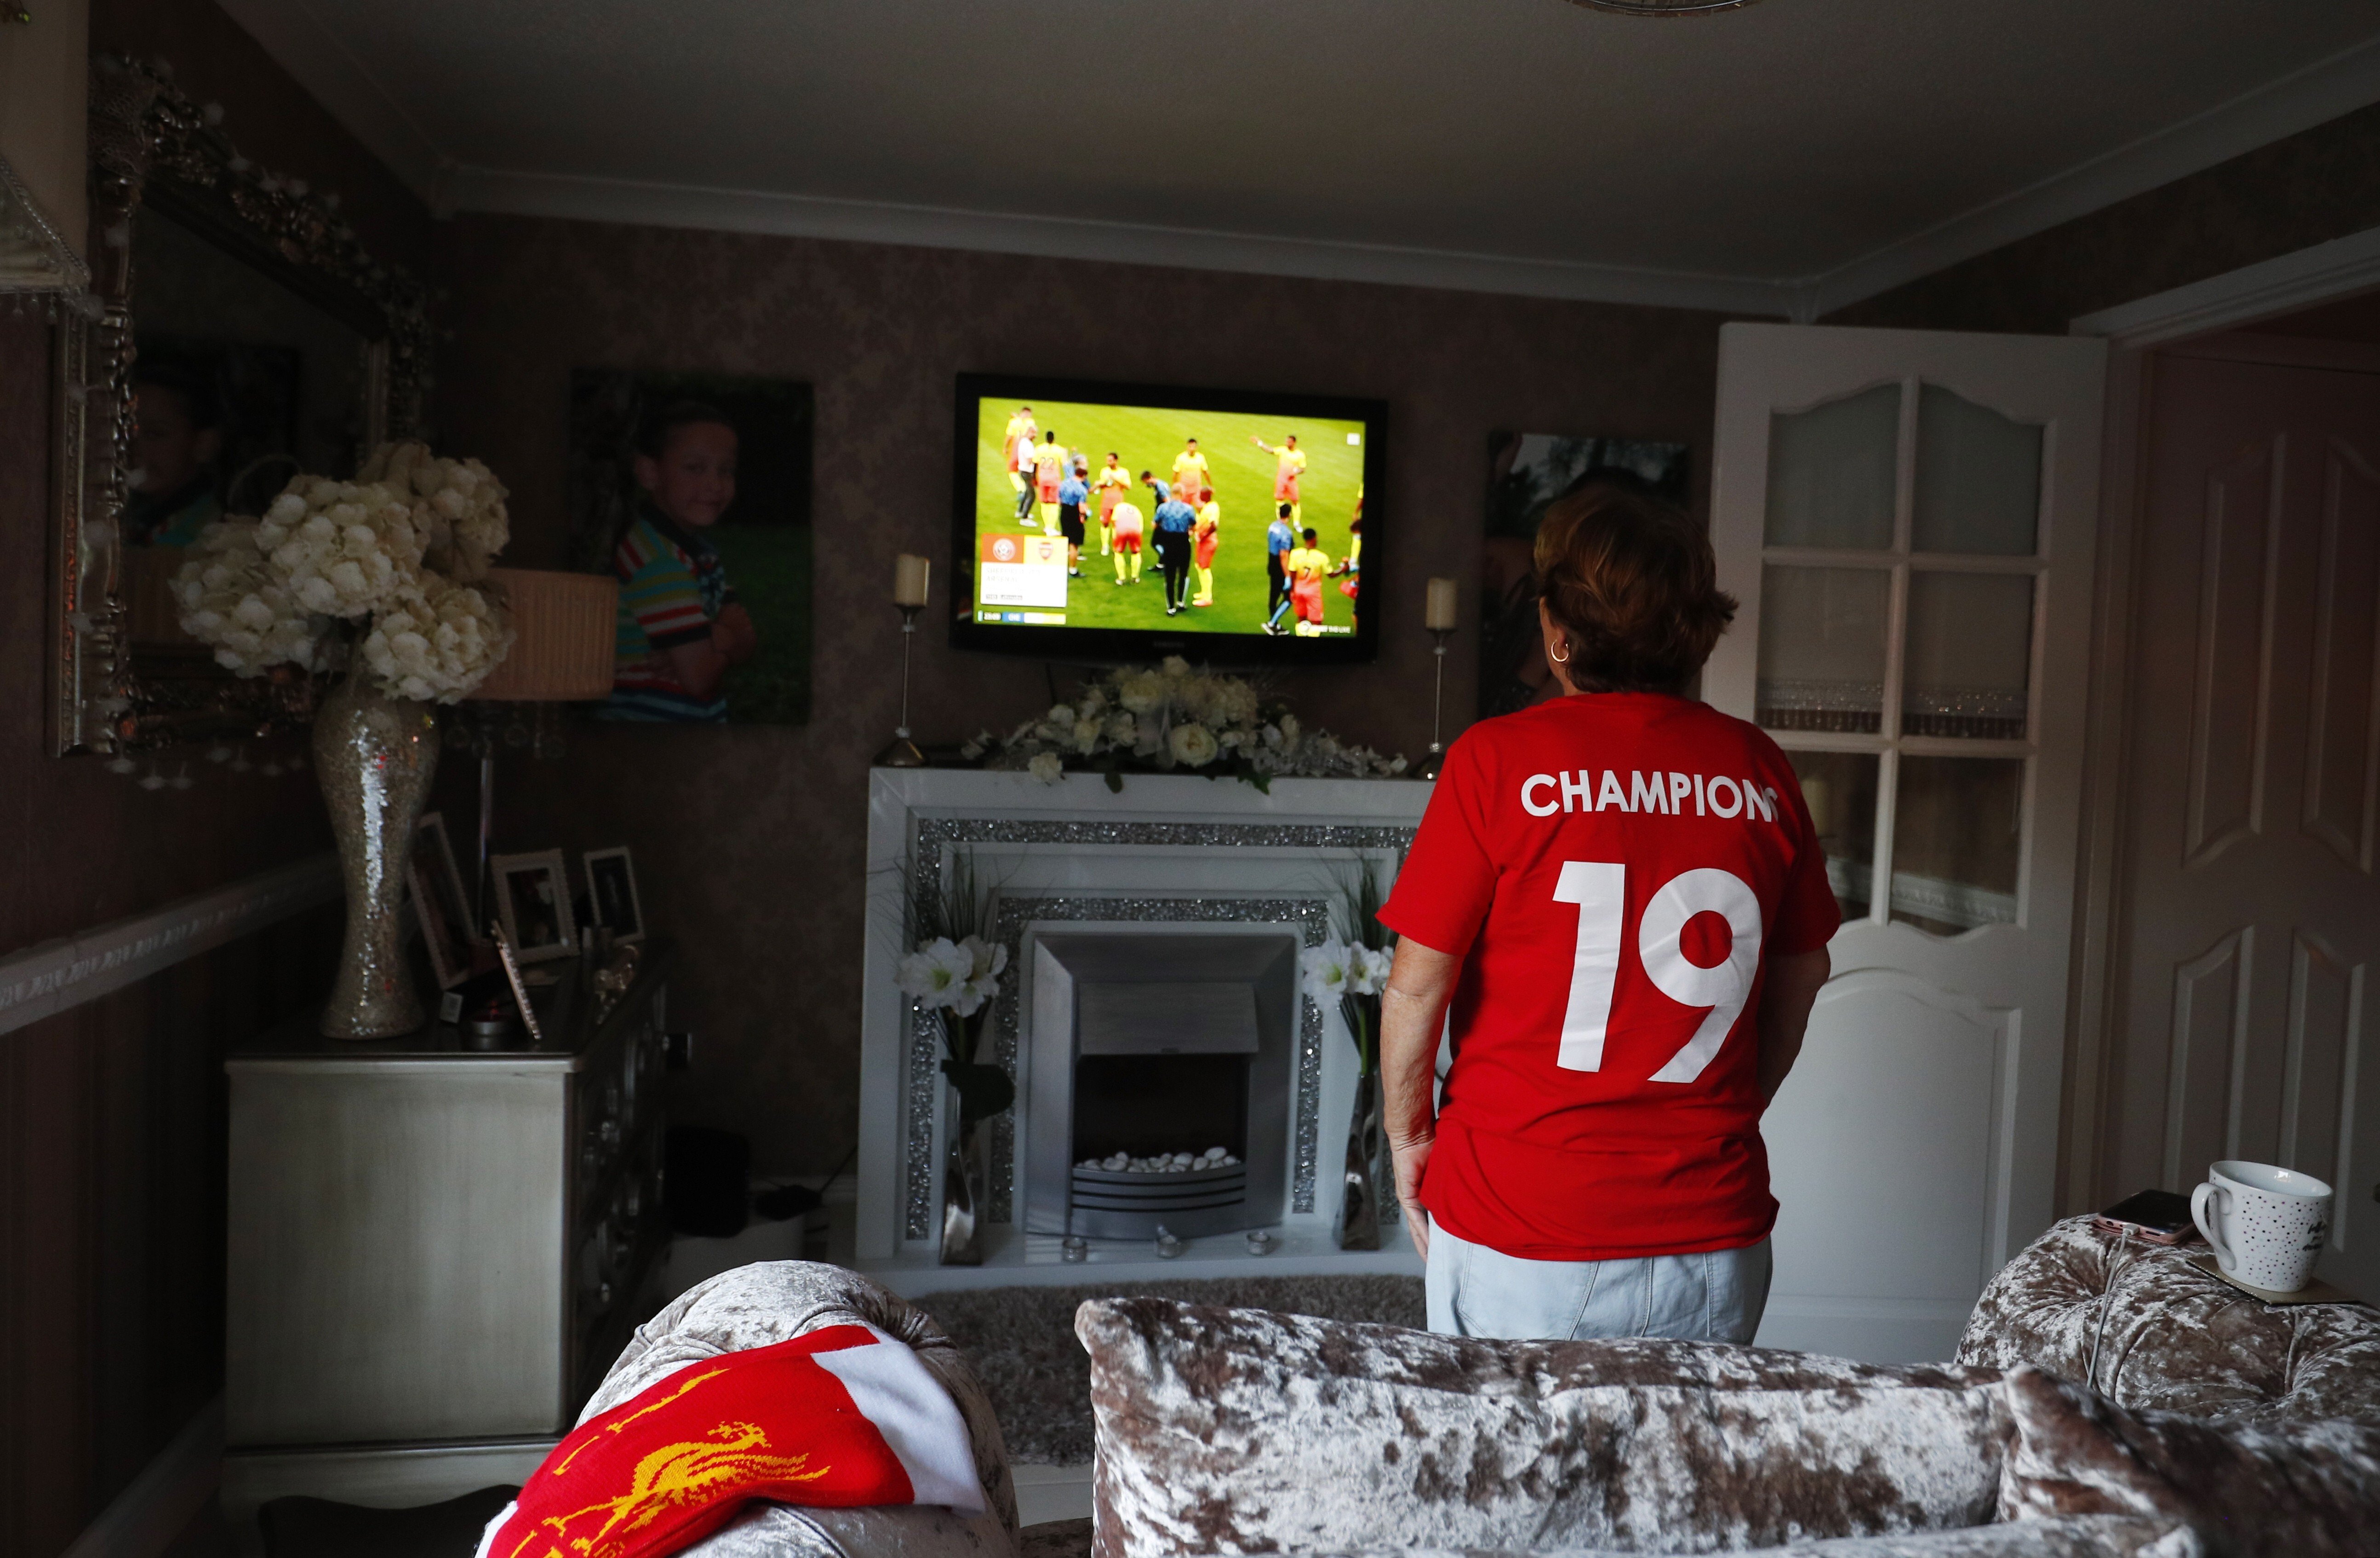 Most Liverpool supporters were forced to witness the club’s once in a generation title win from their own homes, but it’s no less special to them. Photo: EPA